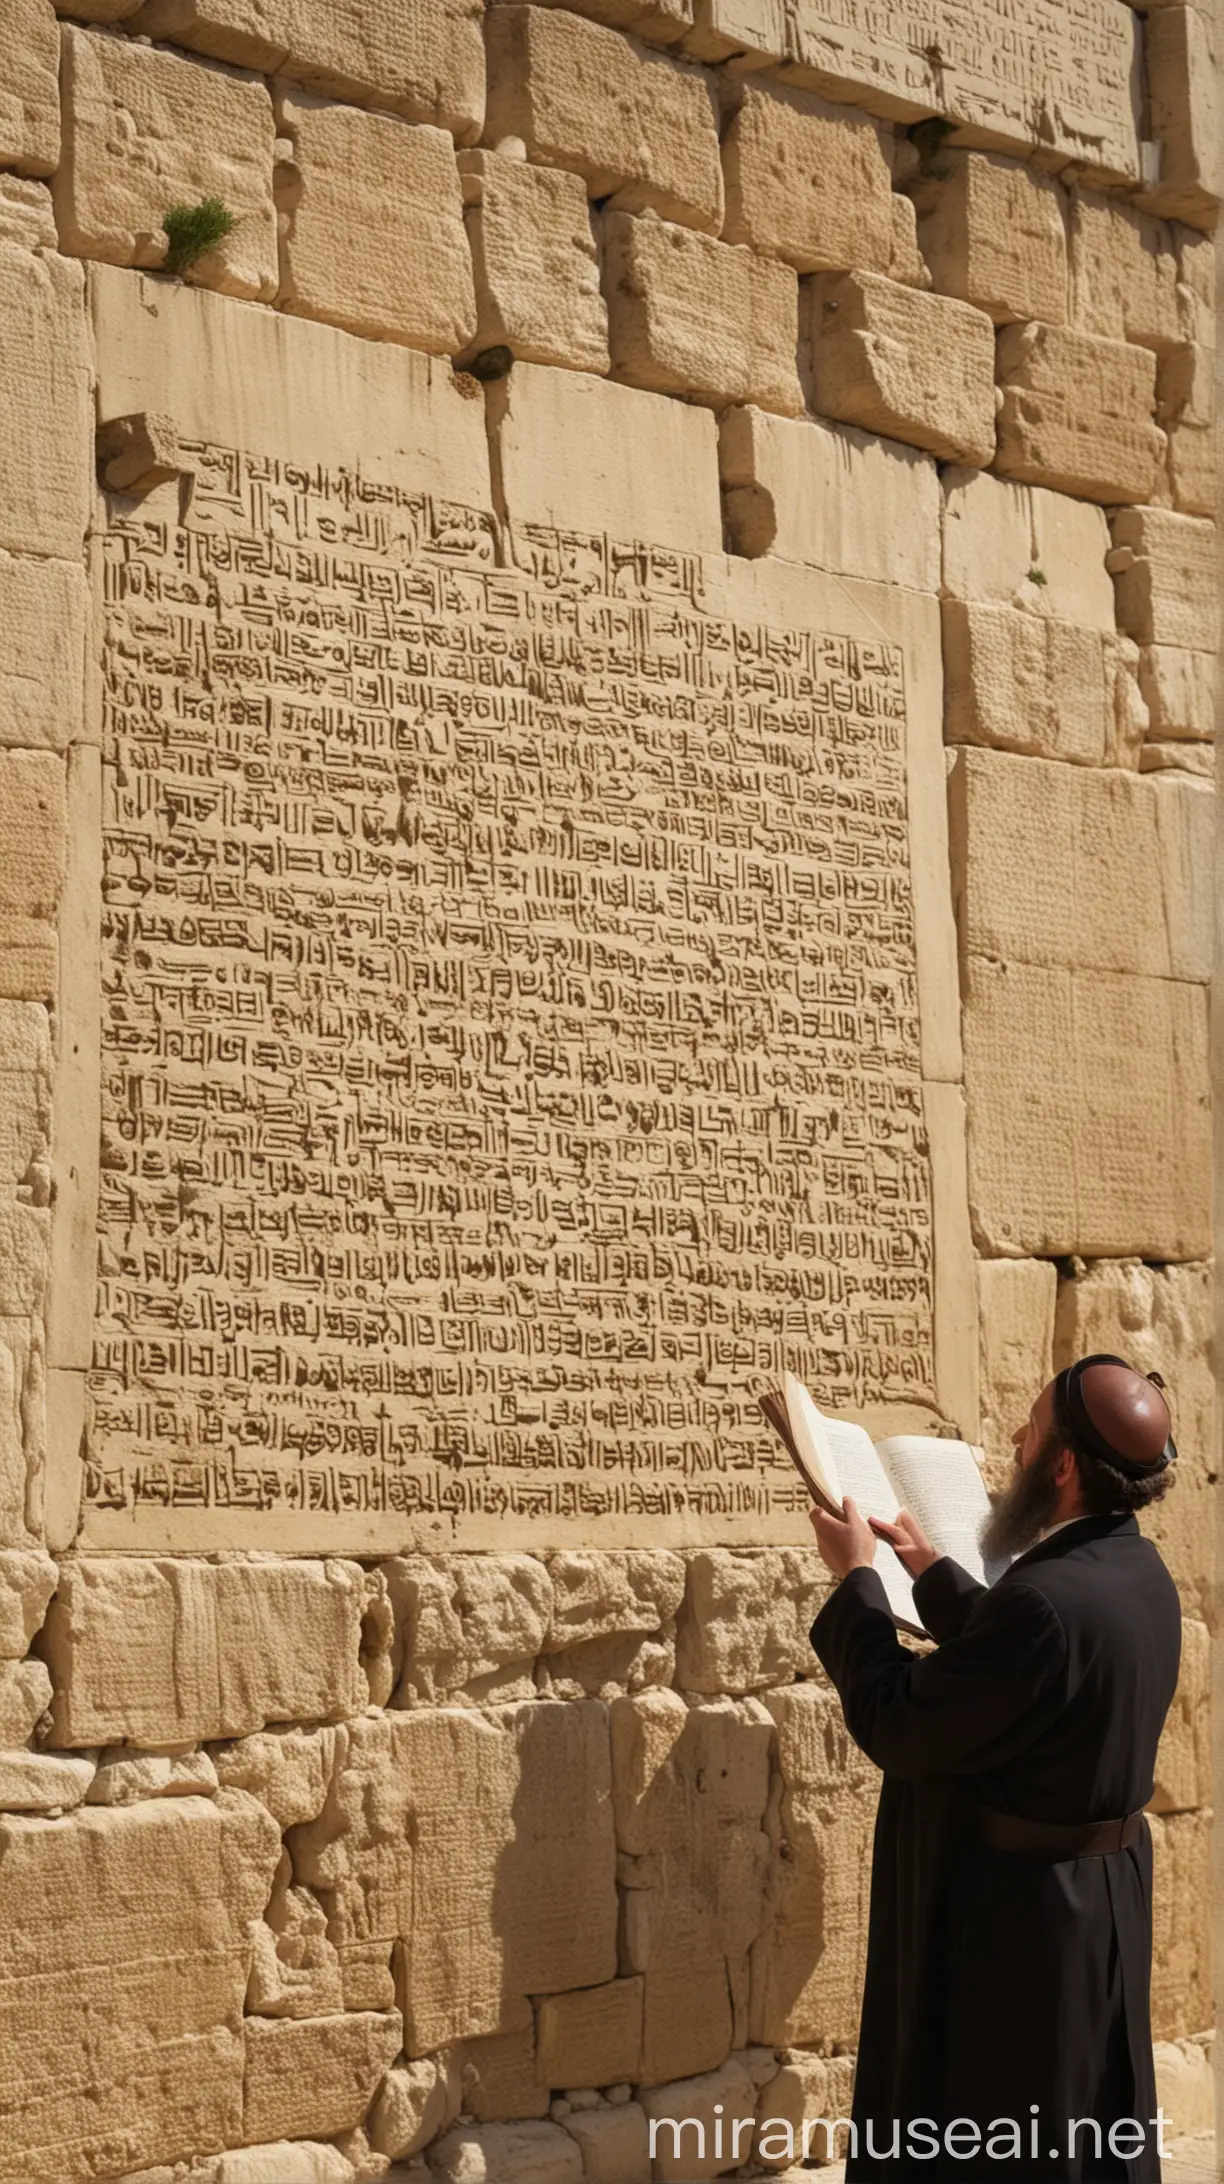 12:36, showing the dedication ceremony of Jerusalem's walls, complete with ancient Hebrew text and illustrations."